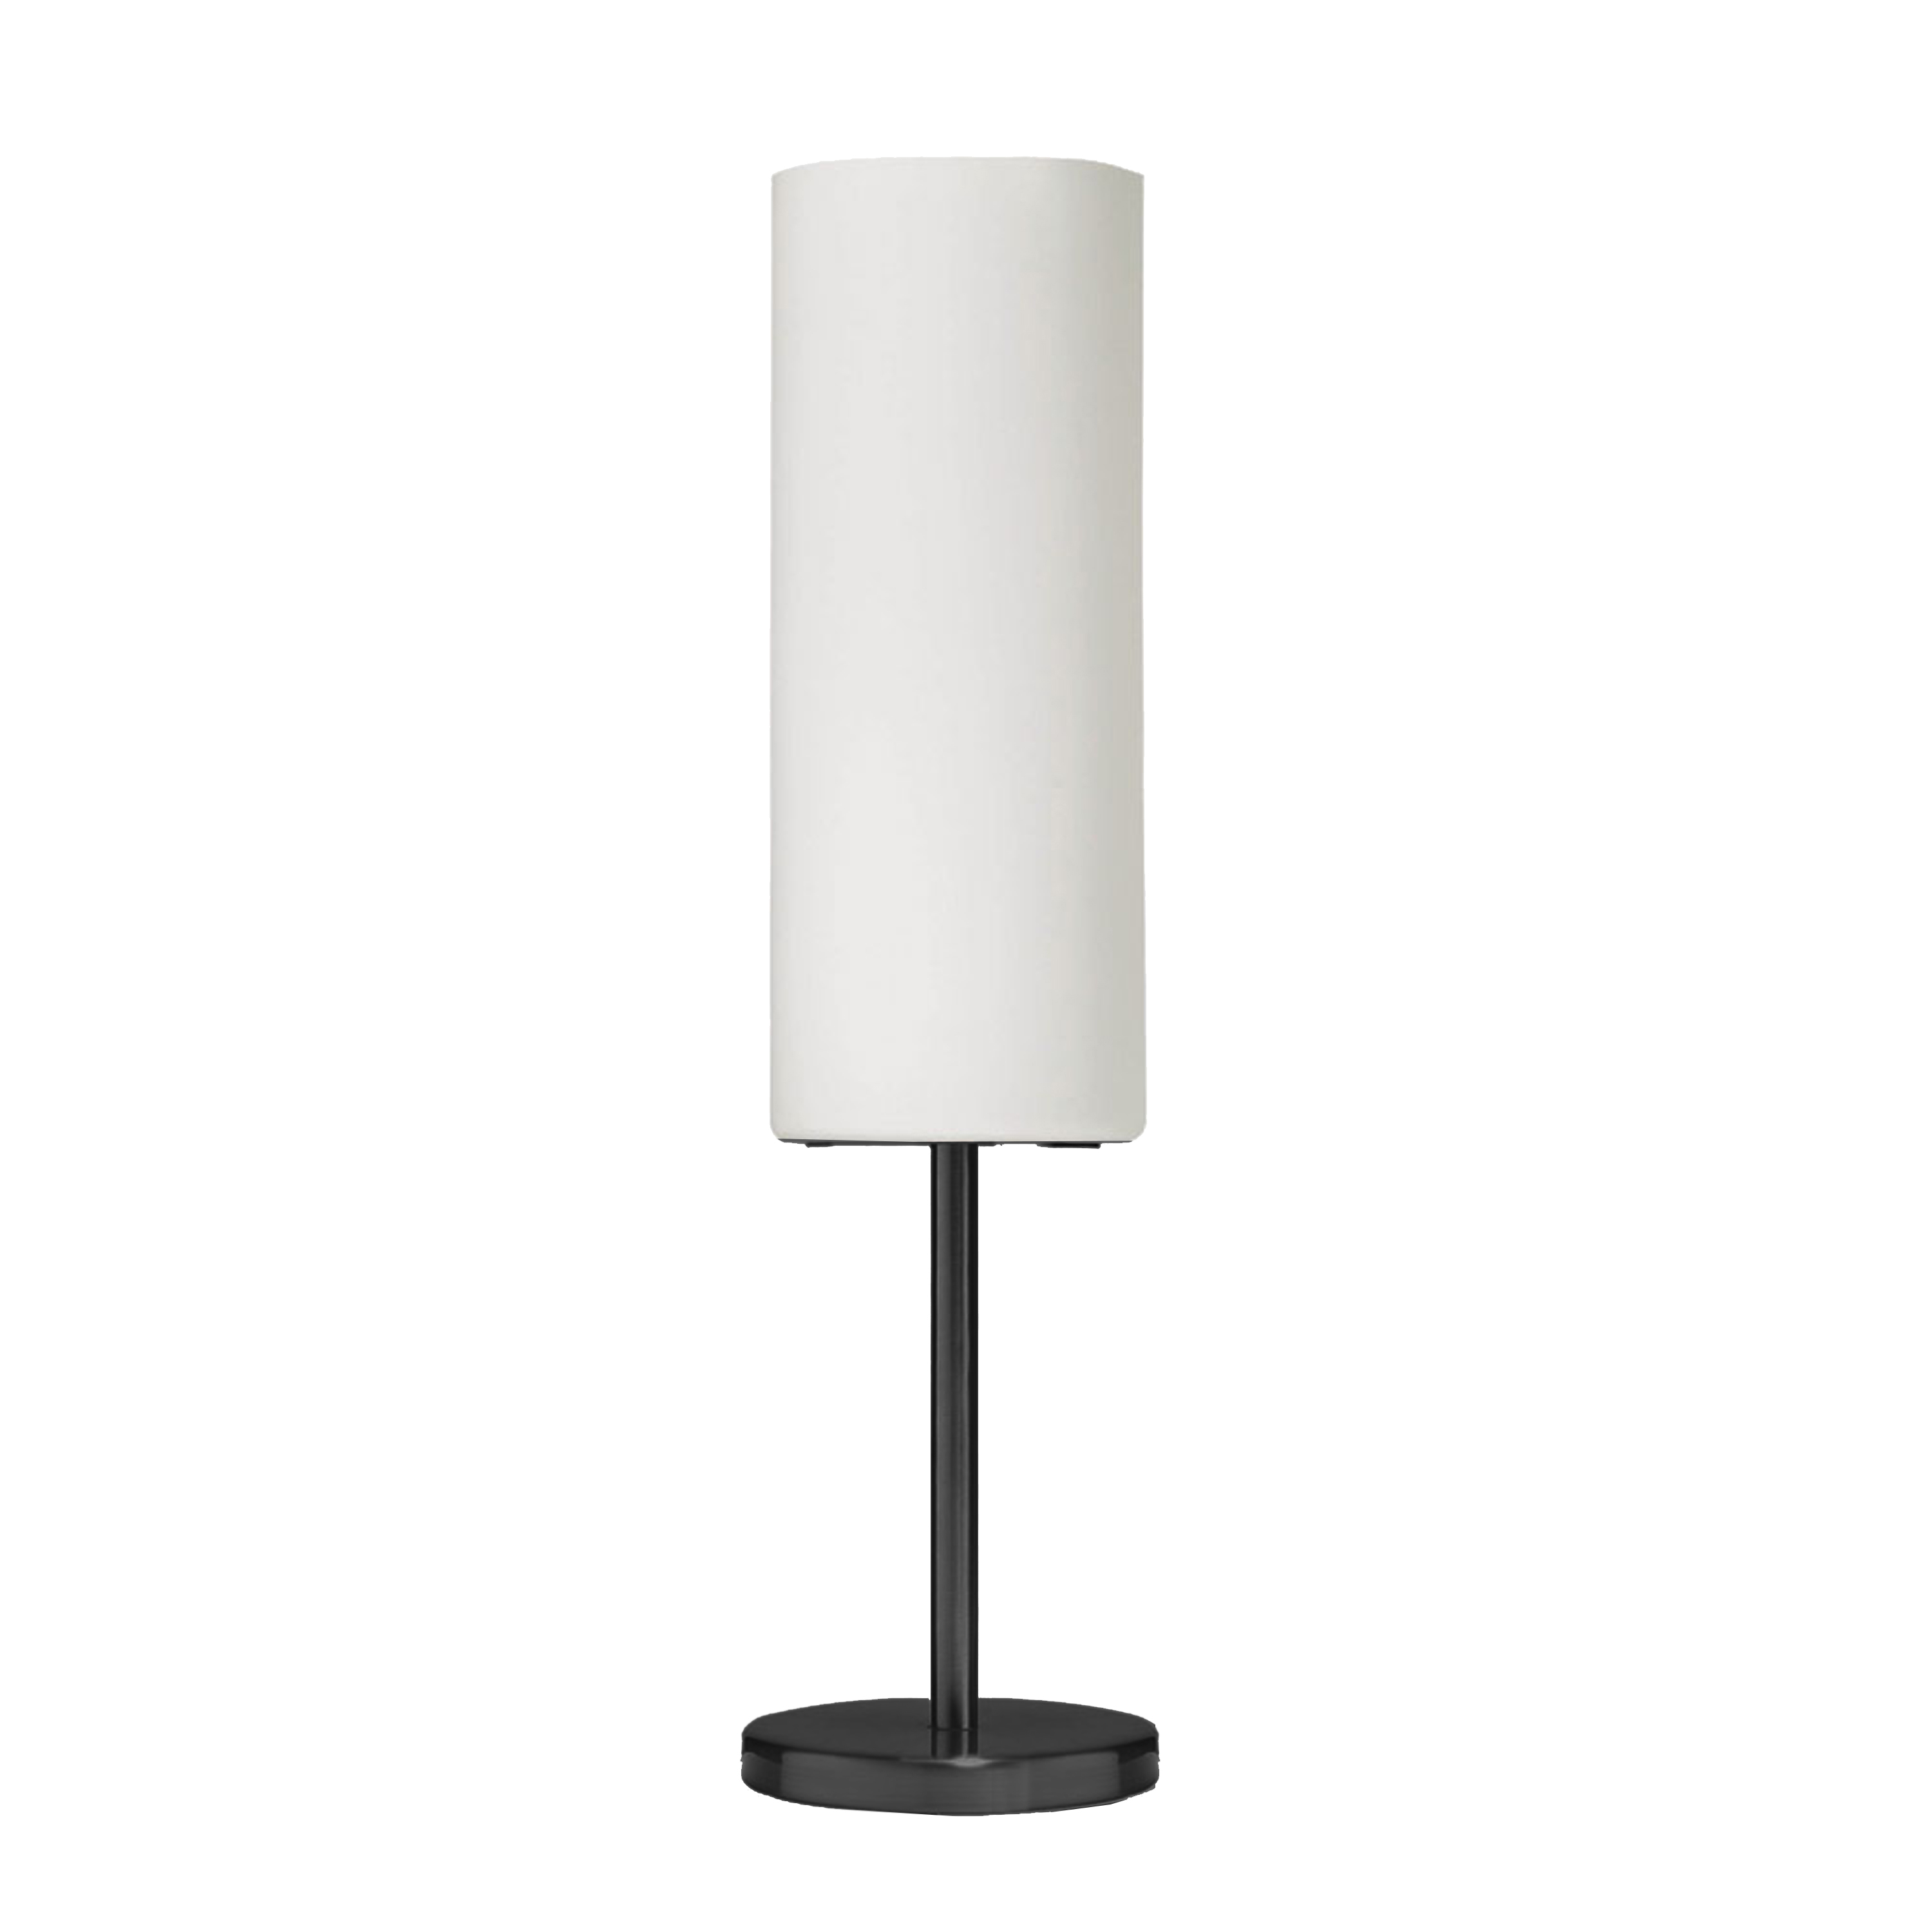 1 Light Incandescent Table Lamp, Matte Black with White Glass